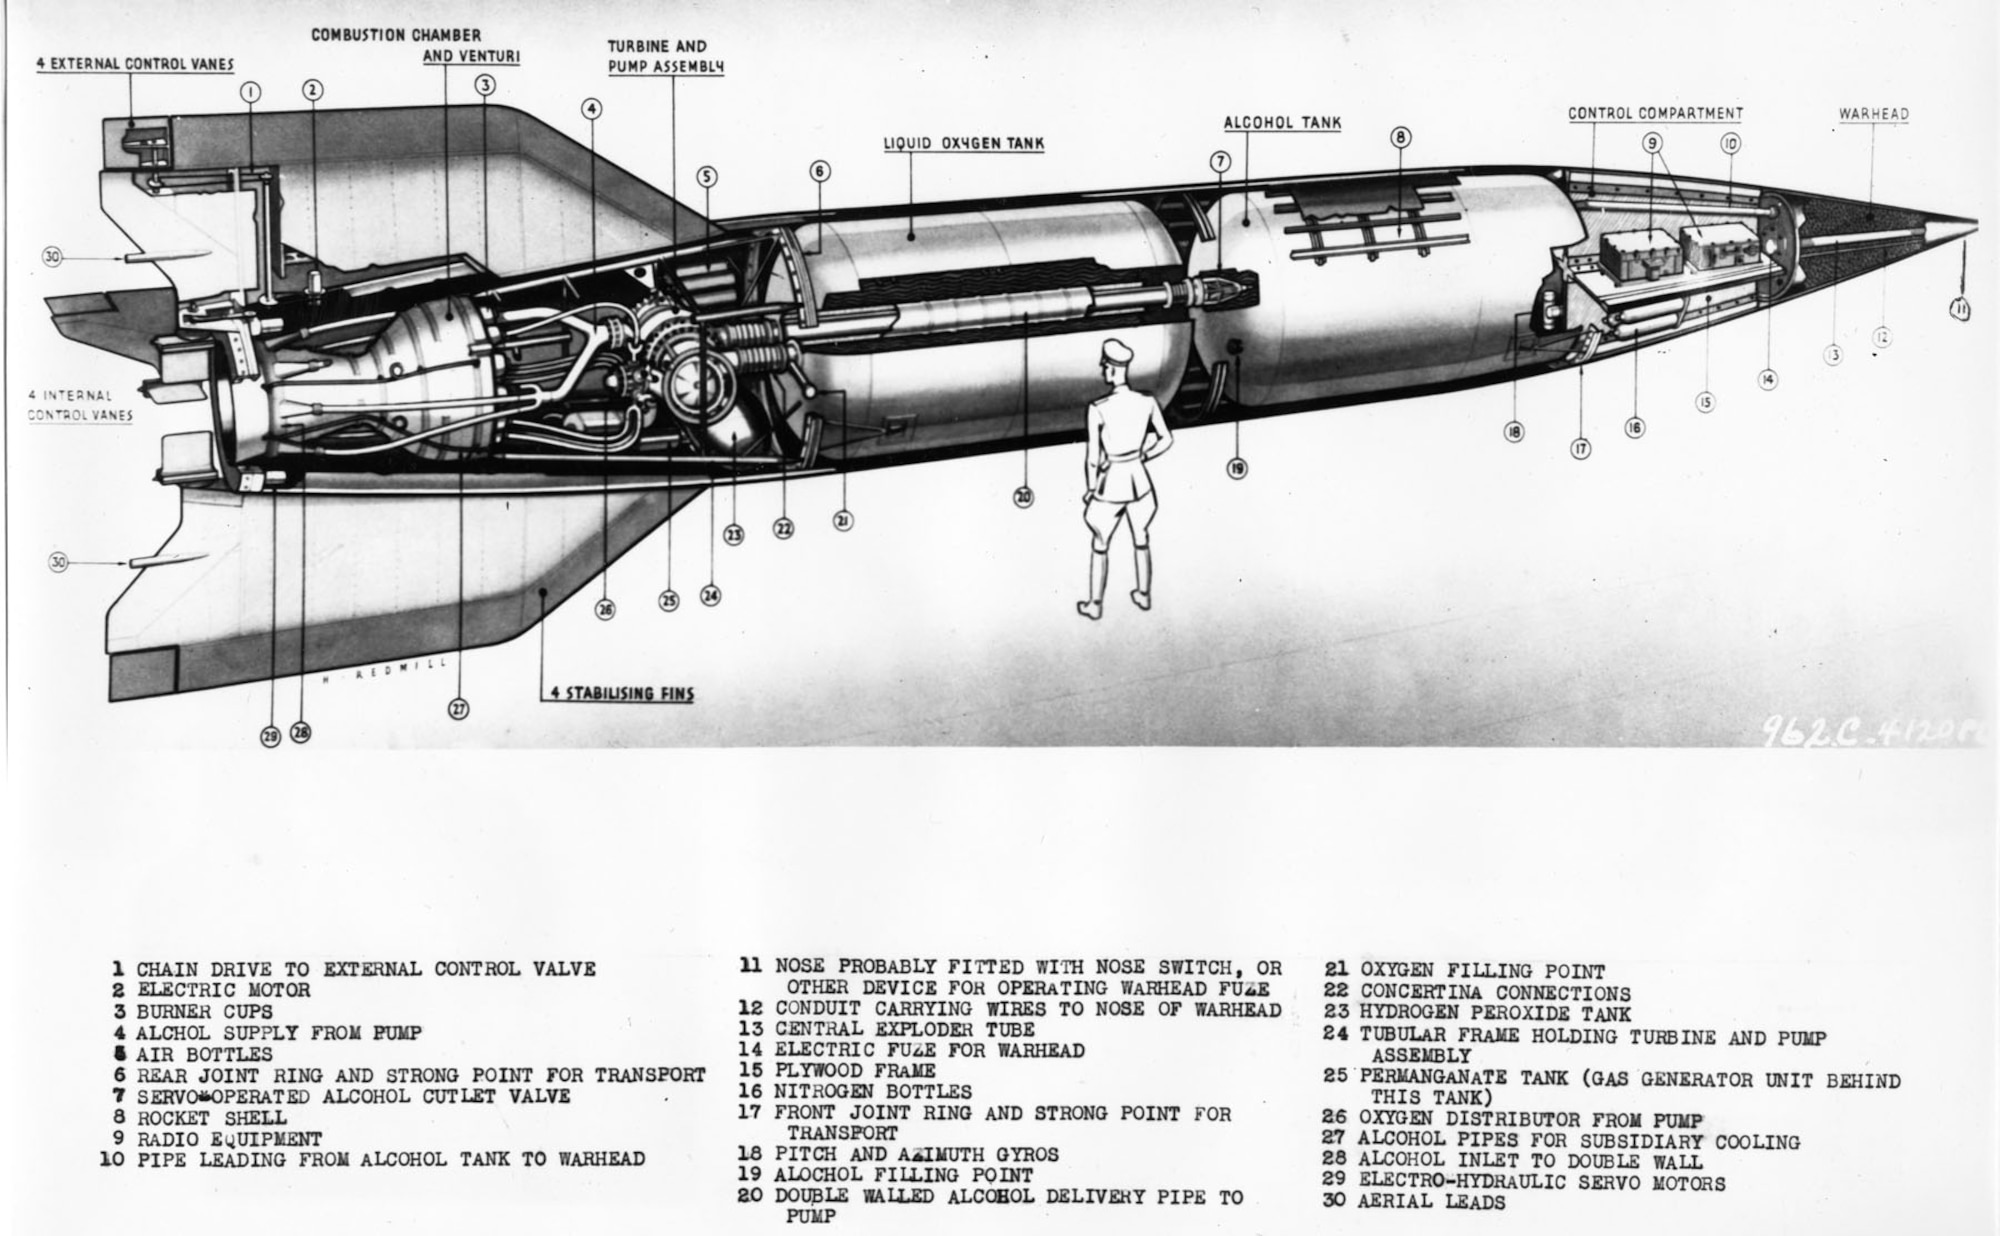 U.S. Army V-2 cutaway drawing showing engine, fuel cells, guidance units and warhead. (U.S. Air Force photo)